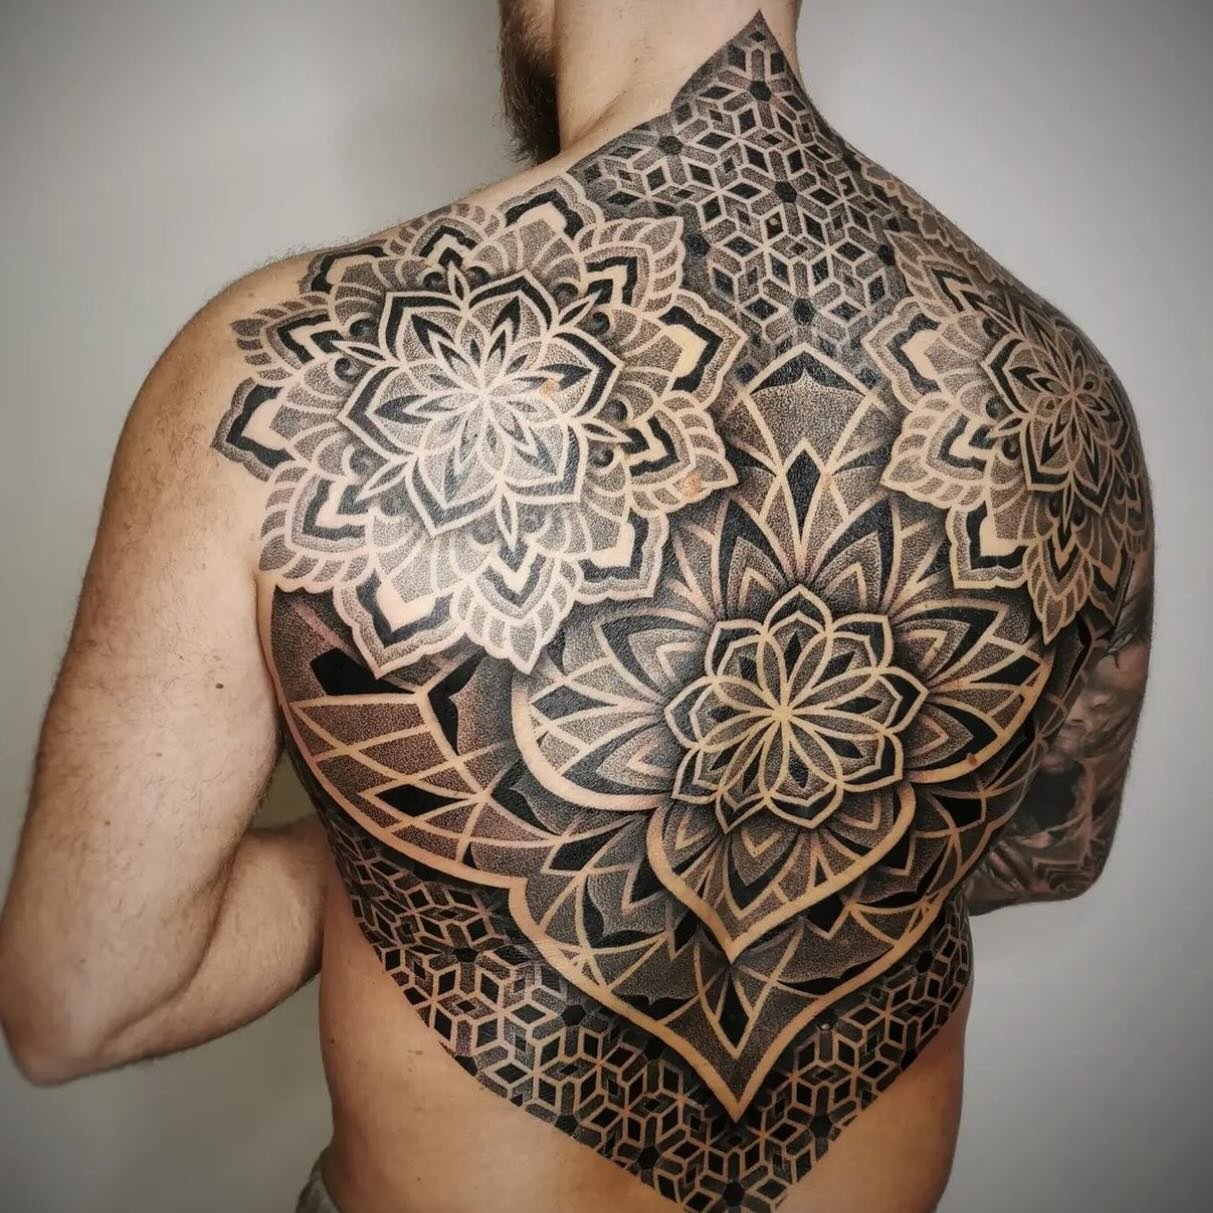 @kseno.now with this fantastic backpiece